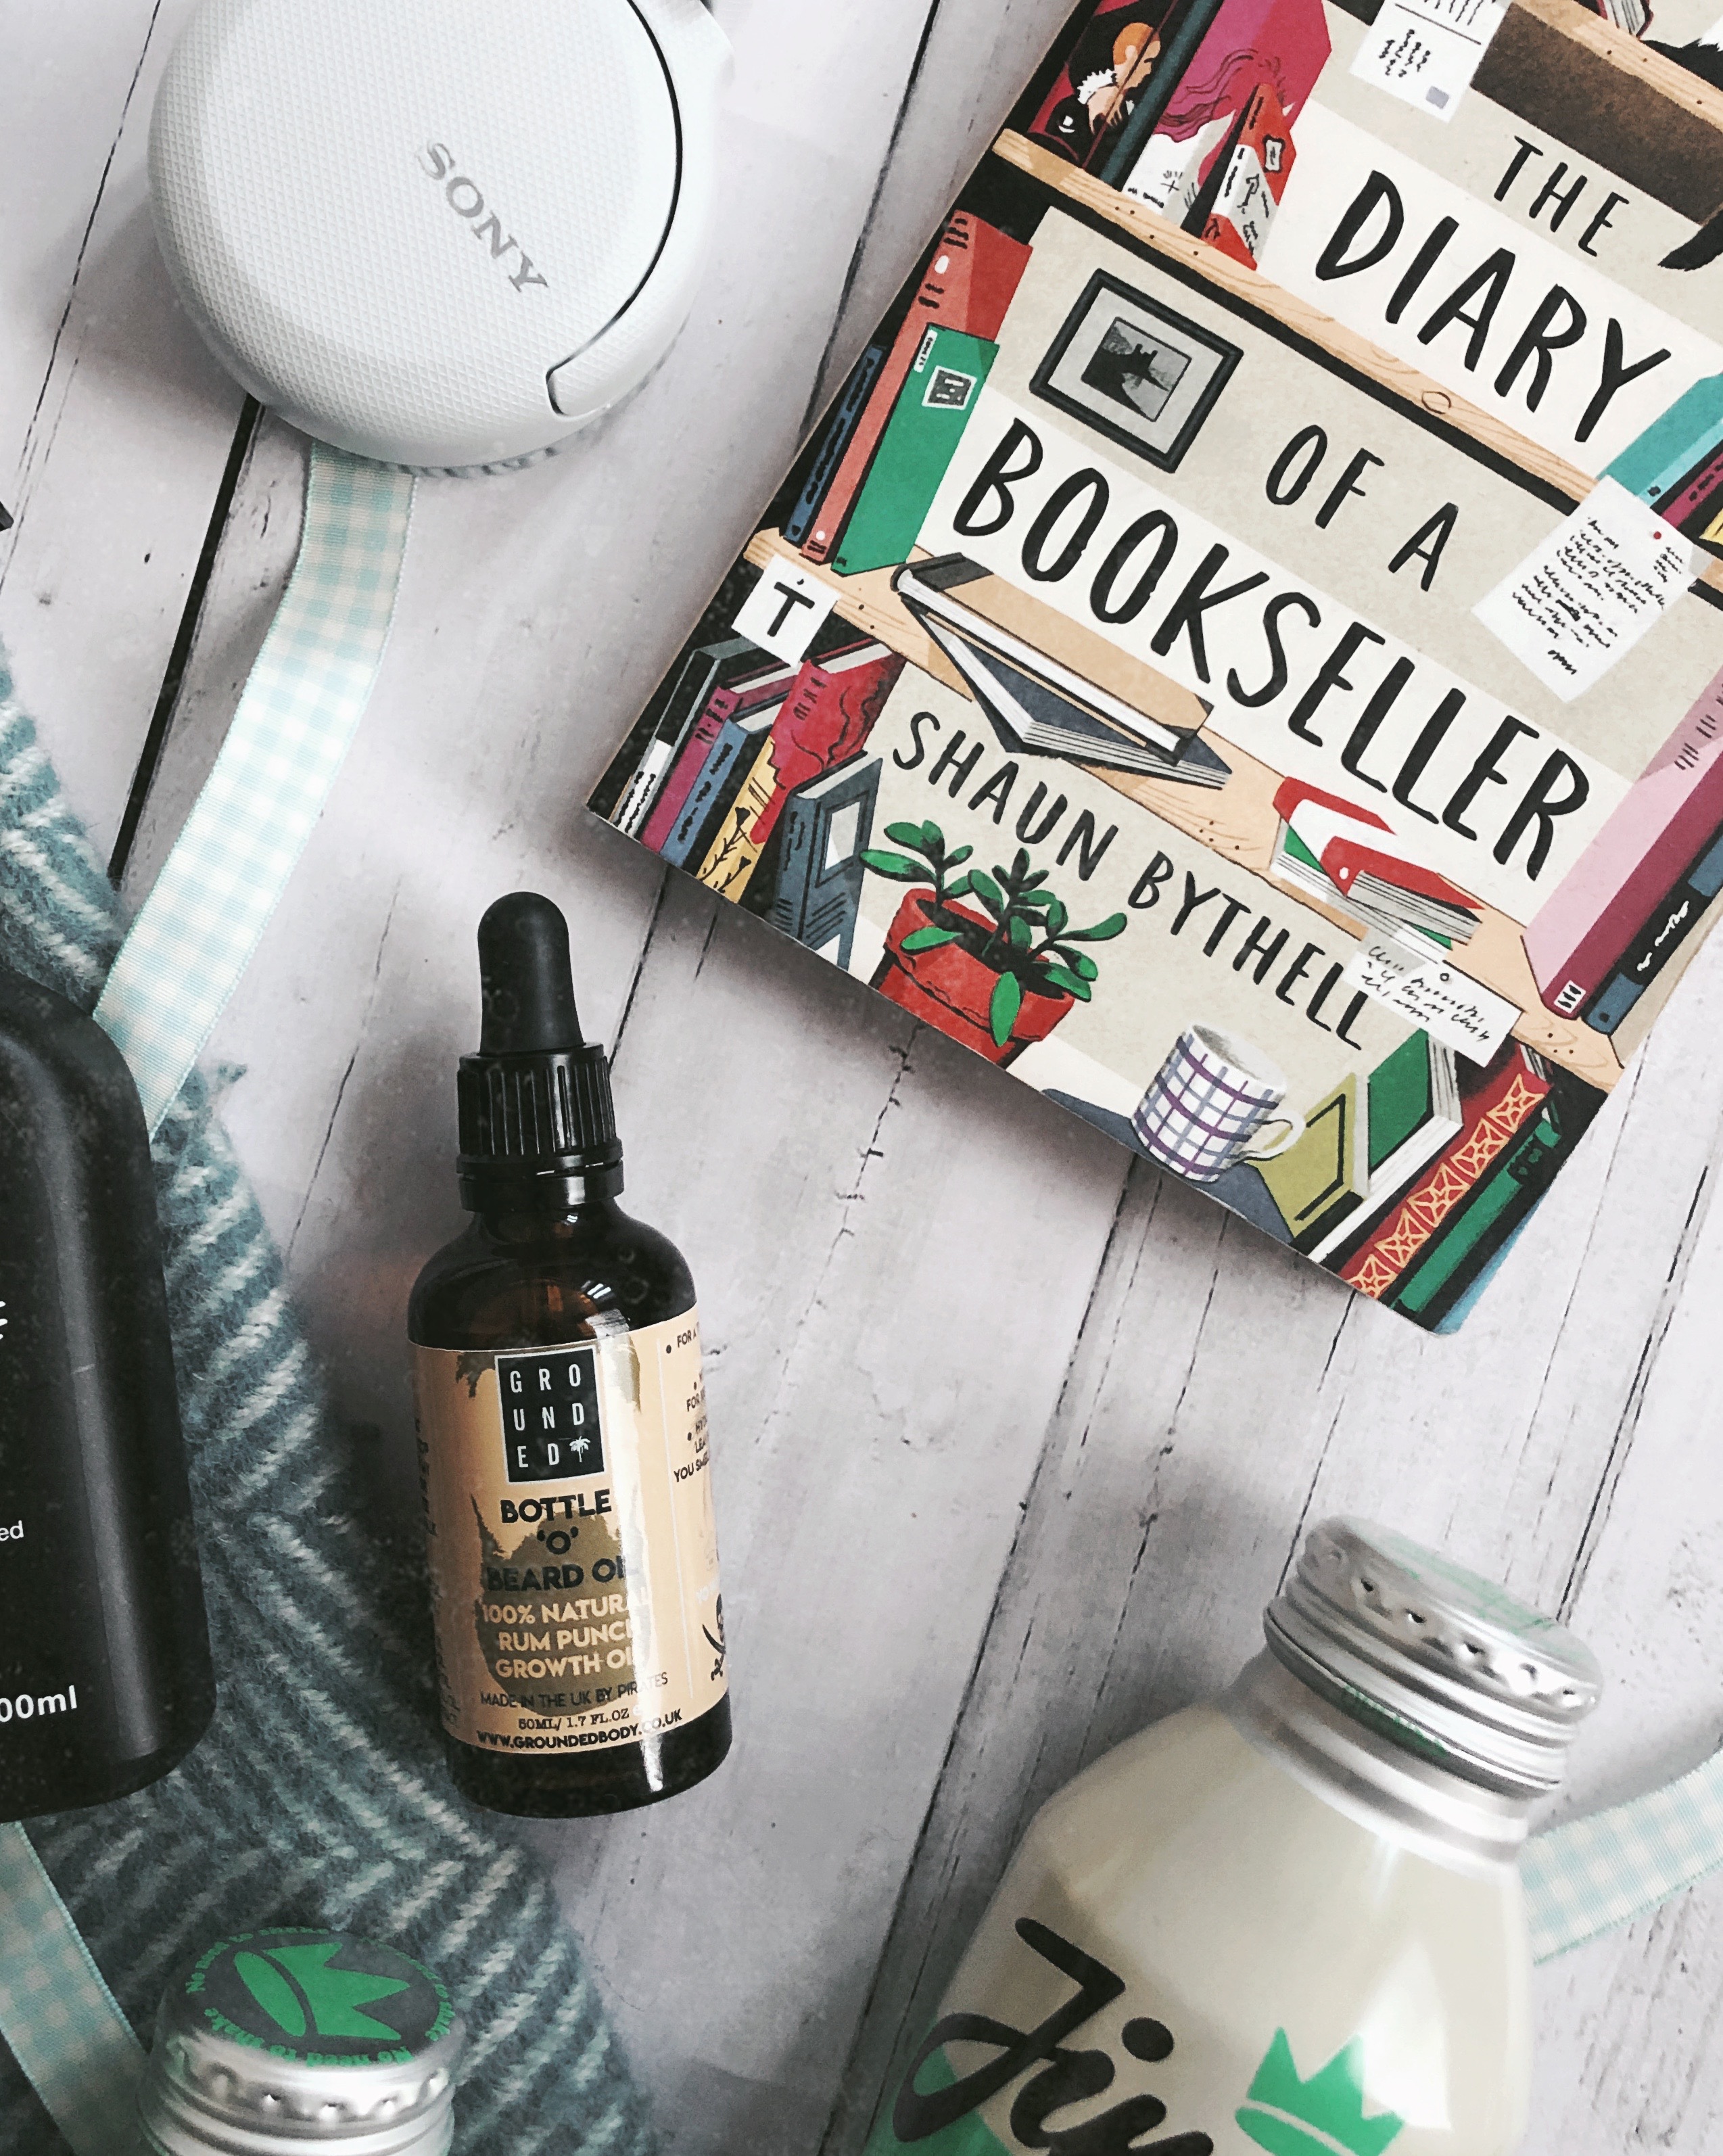 Books and Beard Oil for Father's Day